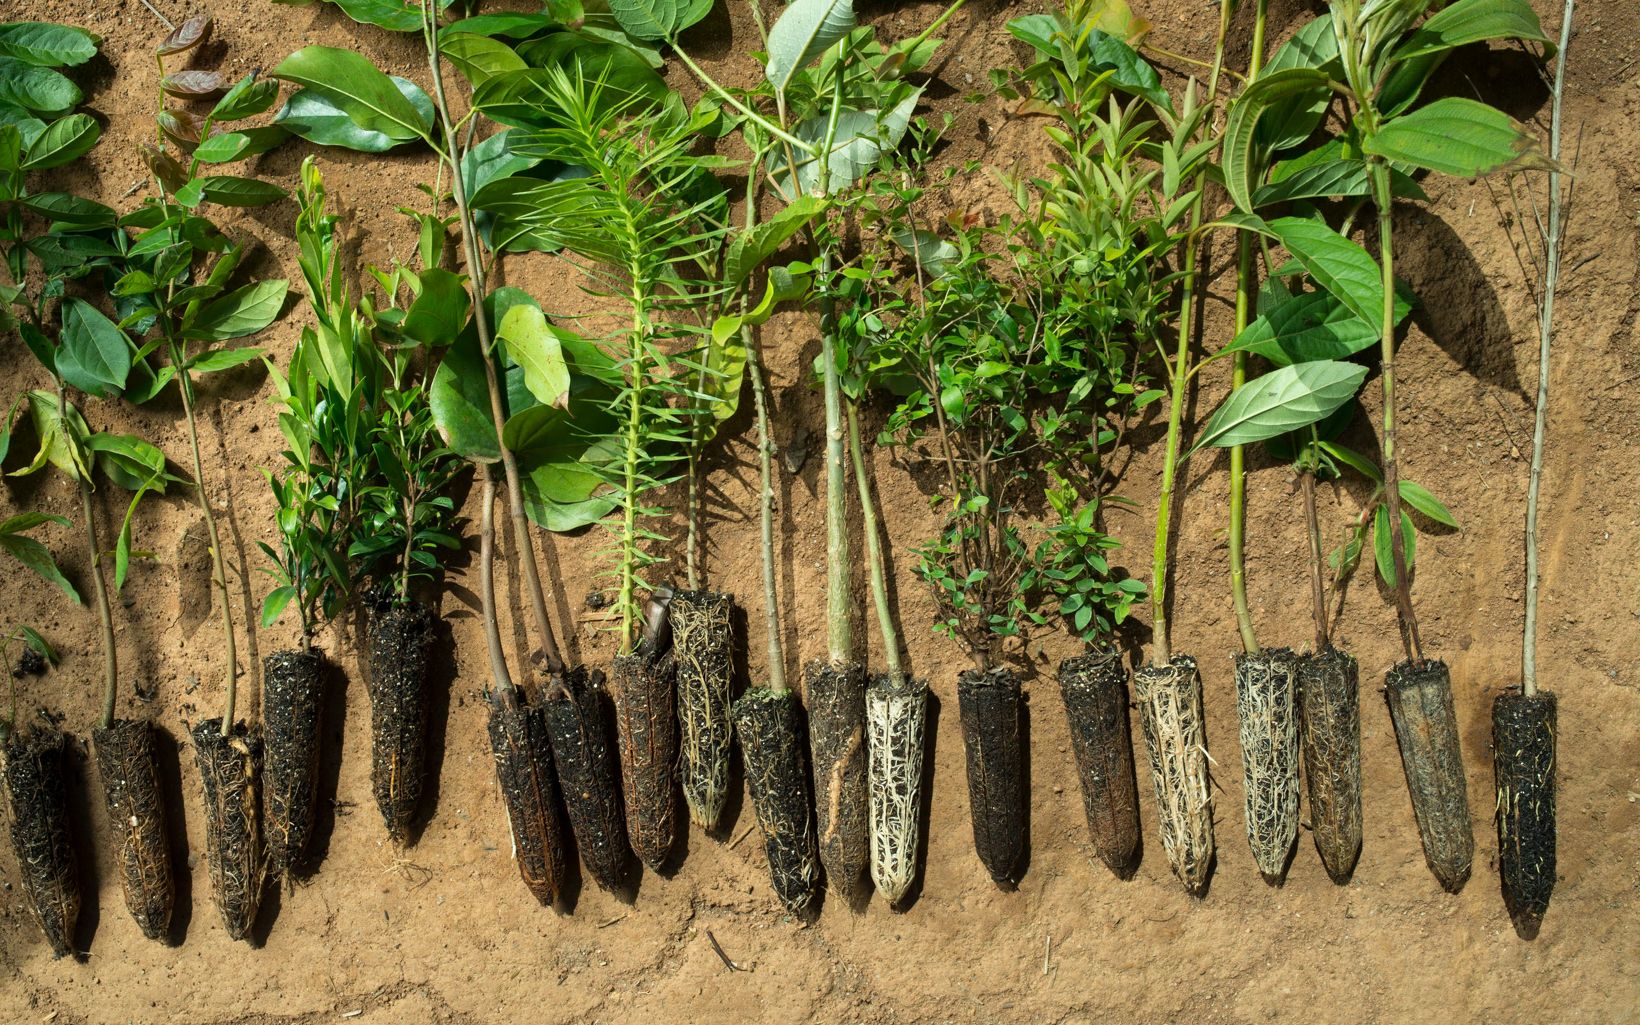 These trees are prepared to be planted in the Mantiqueria area of the Atlantic Forest of Brazil as part of TNC's climate change program.